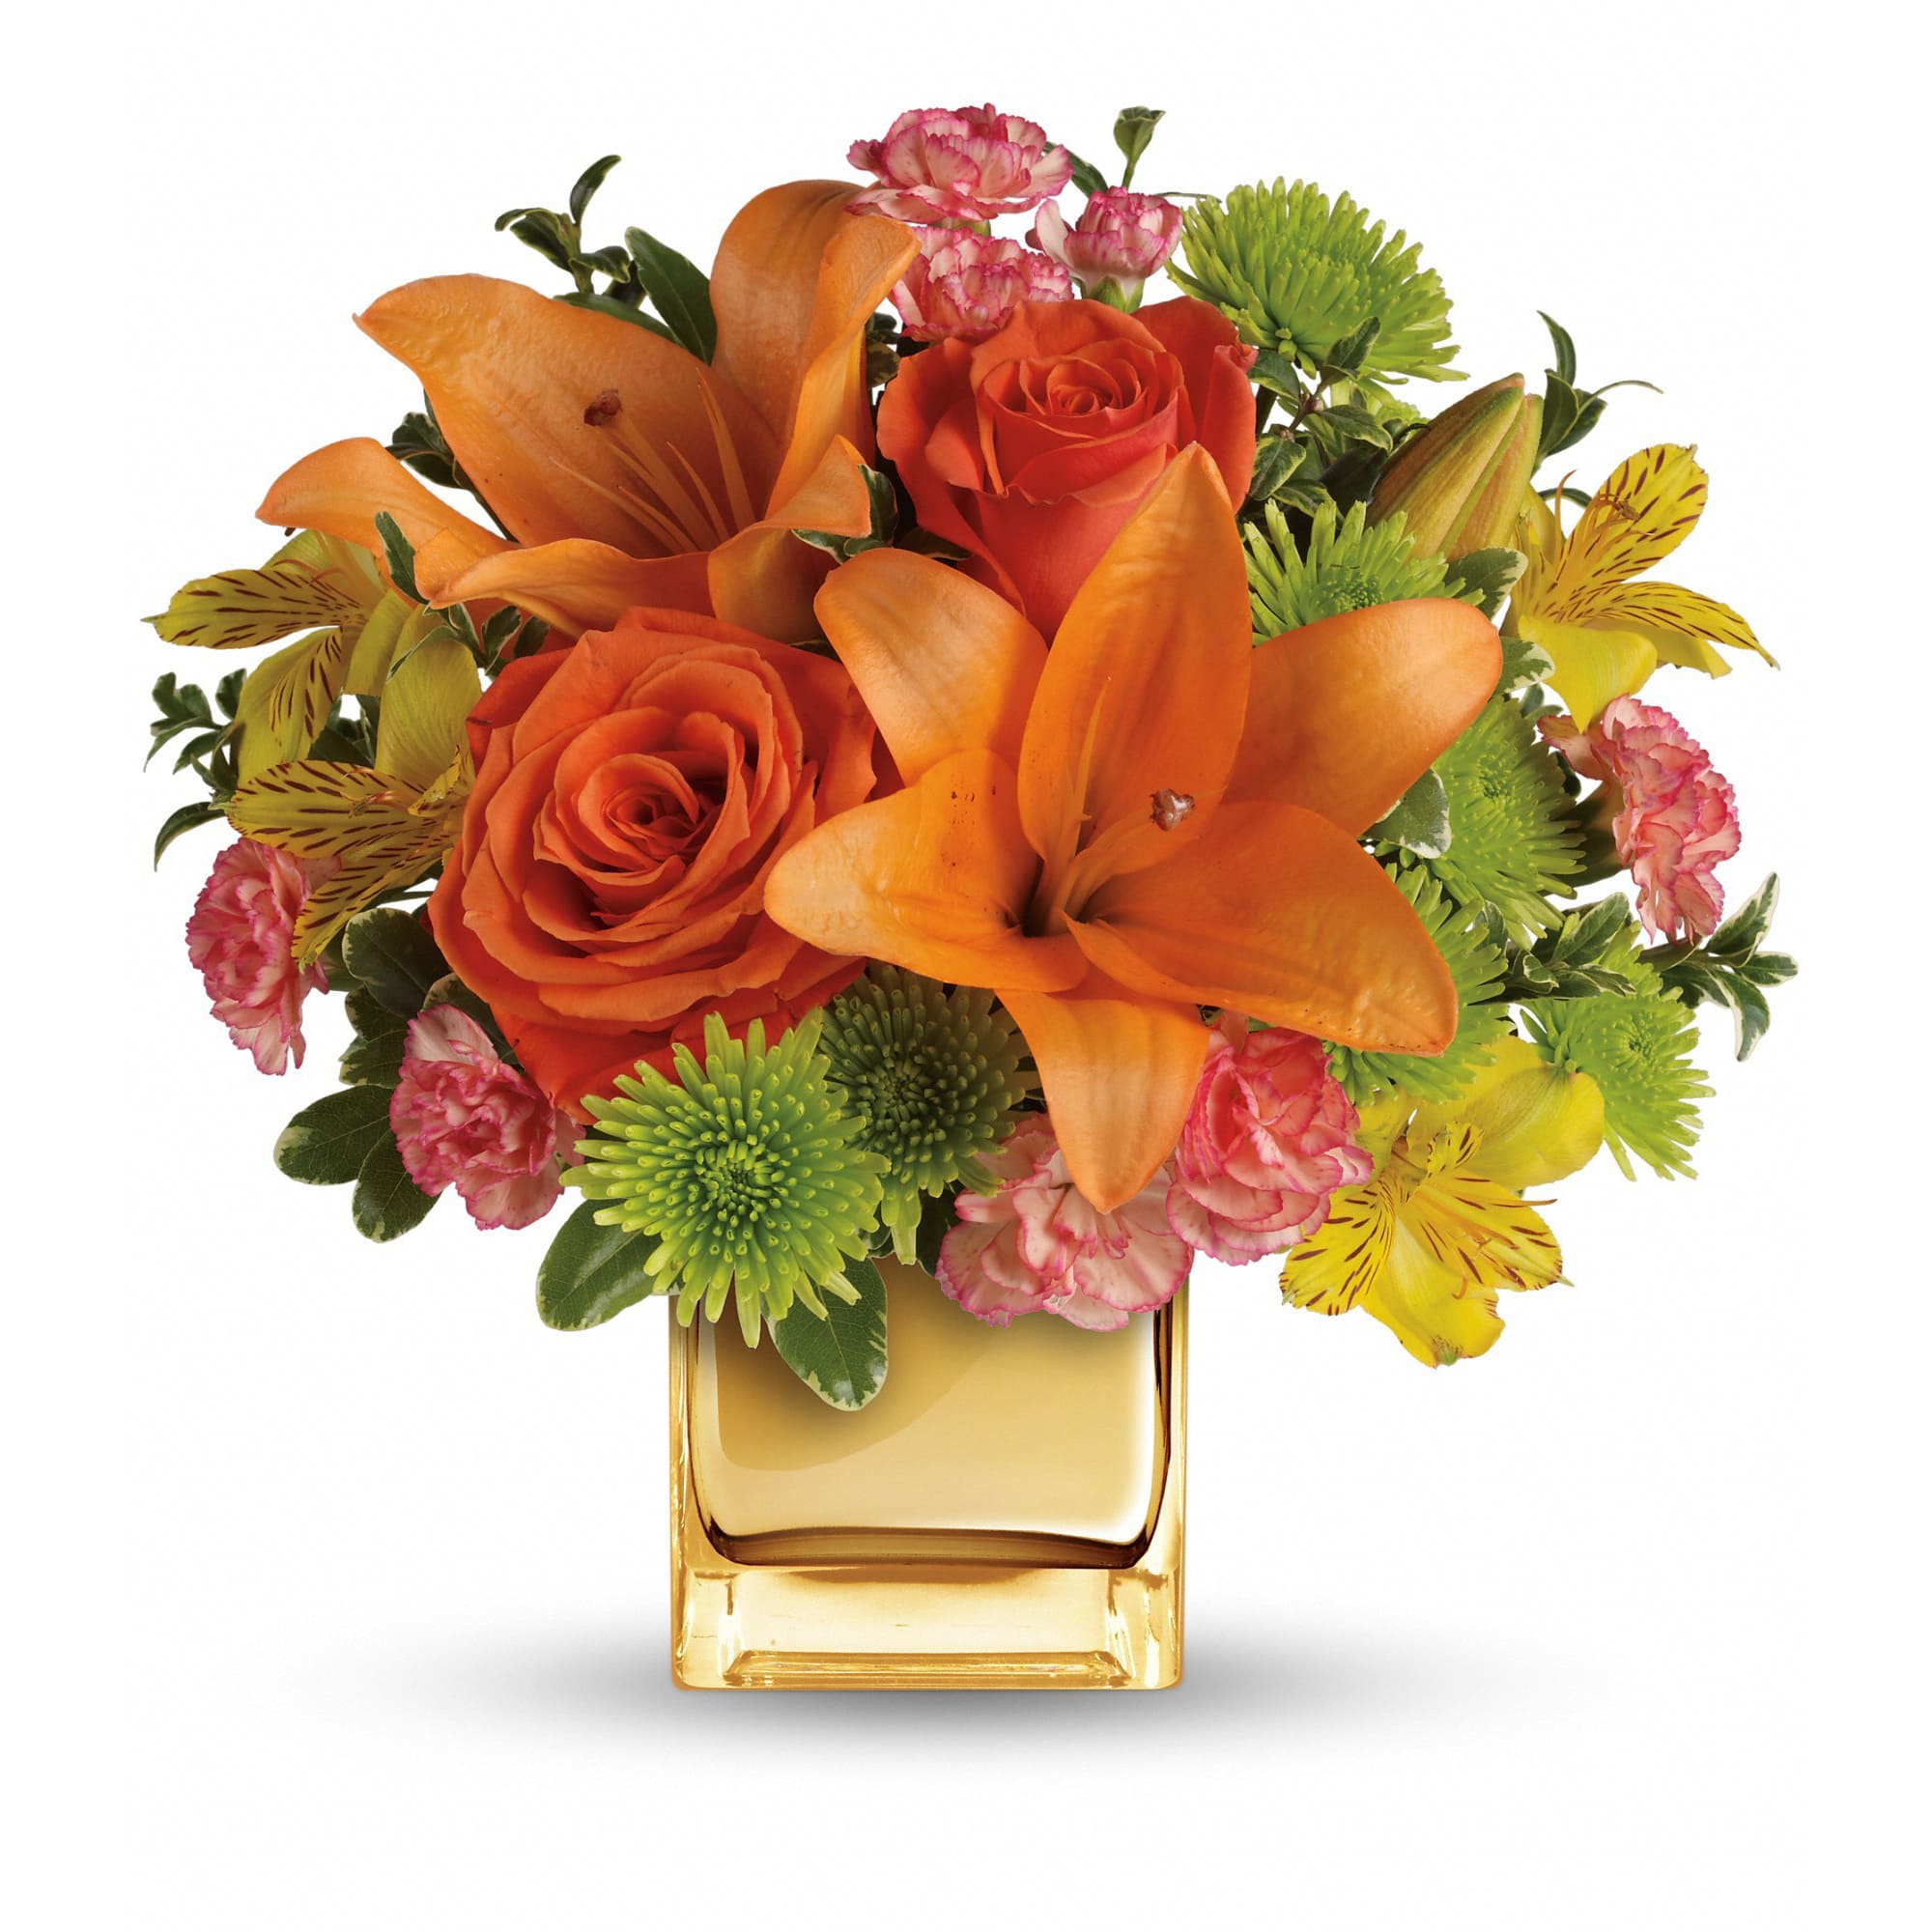 Teleflora's Tropical Punch Bouquet - Glow for it! Capture the magic of a tropical sunset with this gorgeously glowing bouquet. Lush lilies and roses in radiant shades of orange and yellow are presented in a golden Mirrored Cube for a touch of instant glam.  